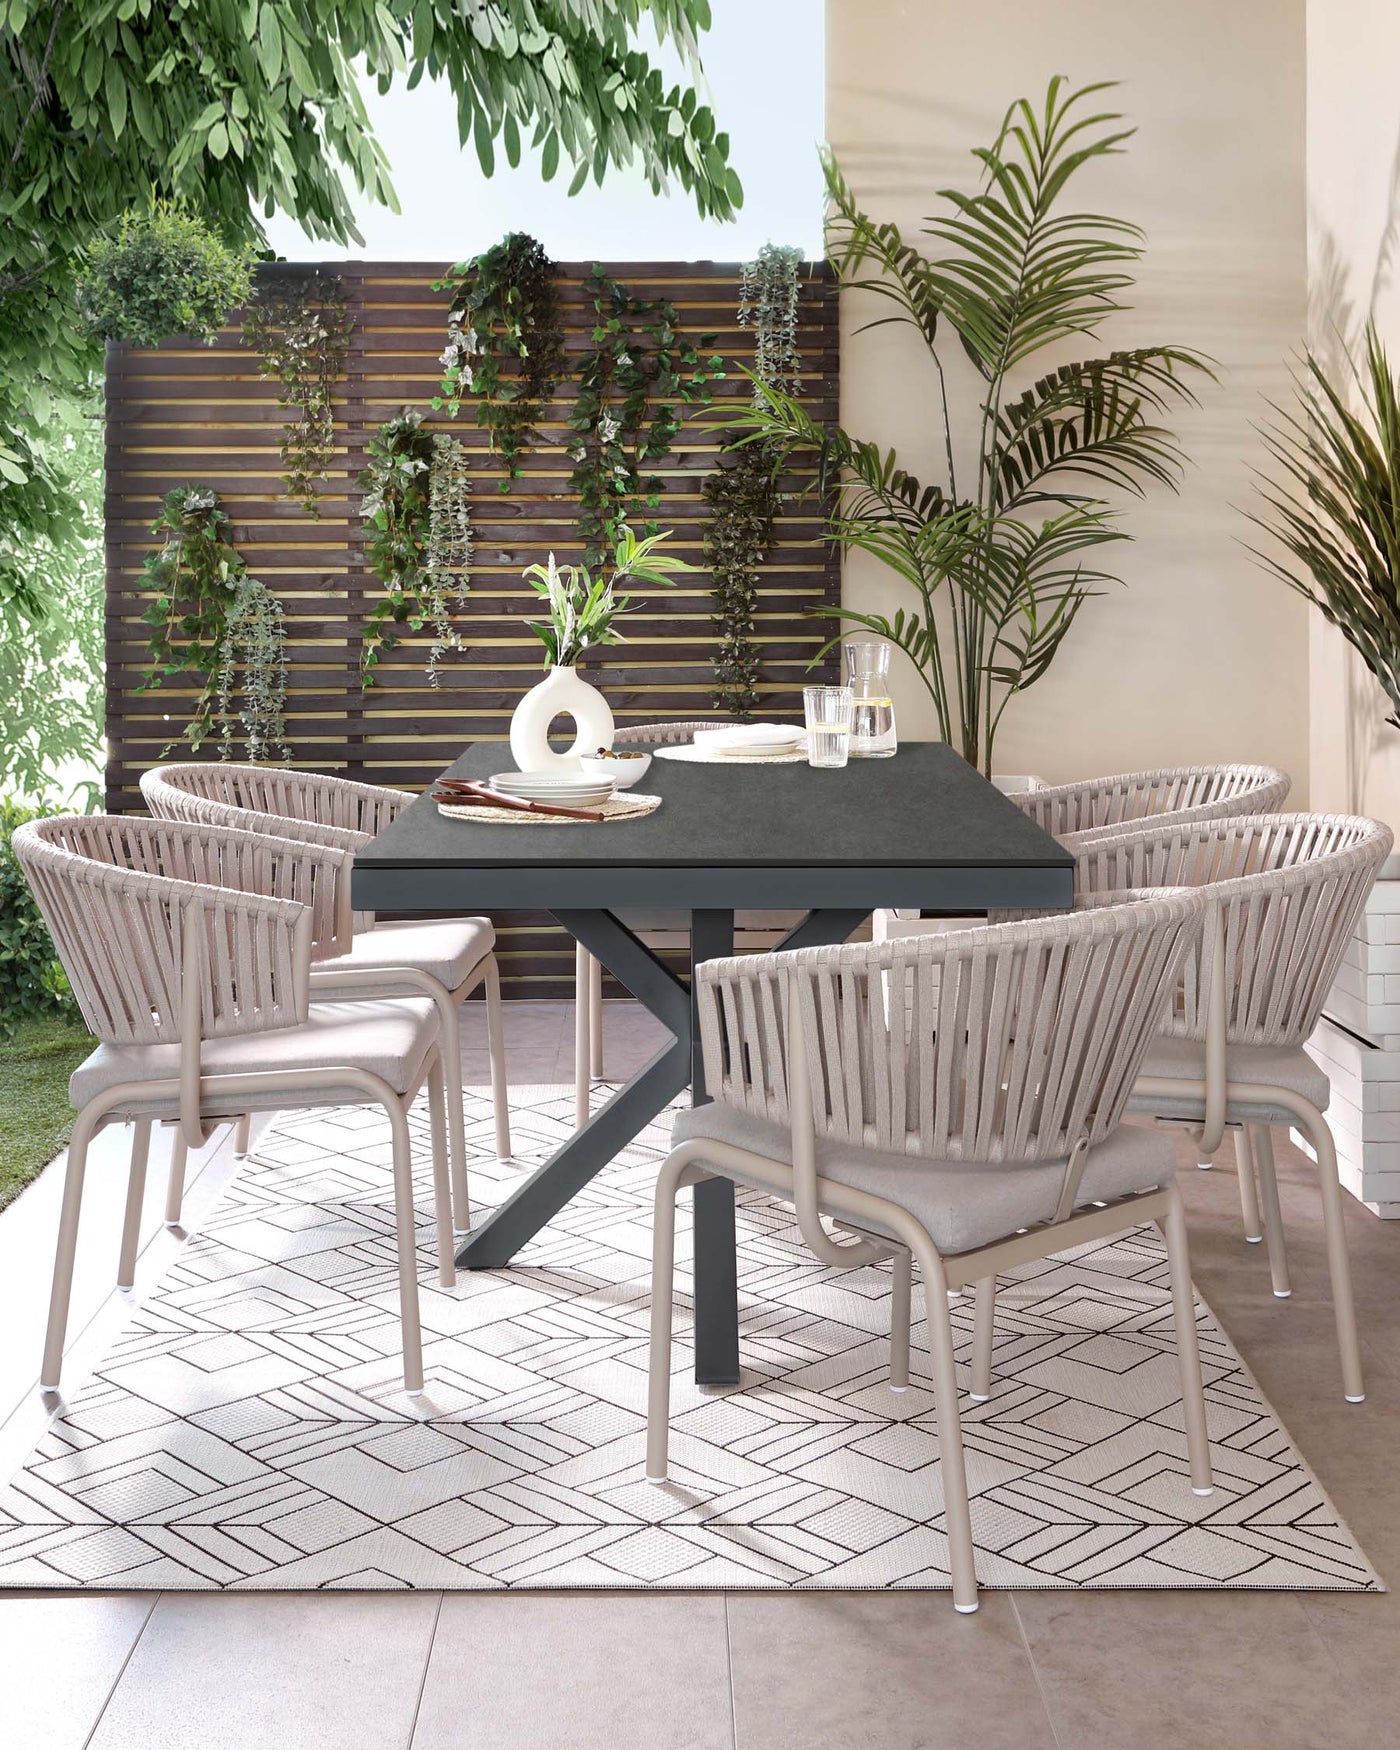 Outdoor dining set featuring a modern black rectangular table and six contemporary armchairs with woven backrests in a light grey finish, set on a geometric patterned area rug. The ensemble is displayed in a cosy patio setting with greenery.